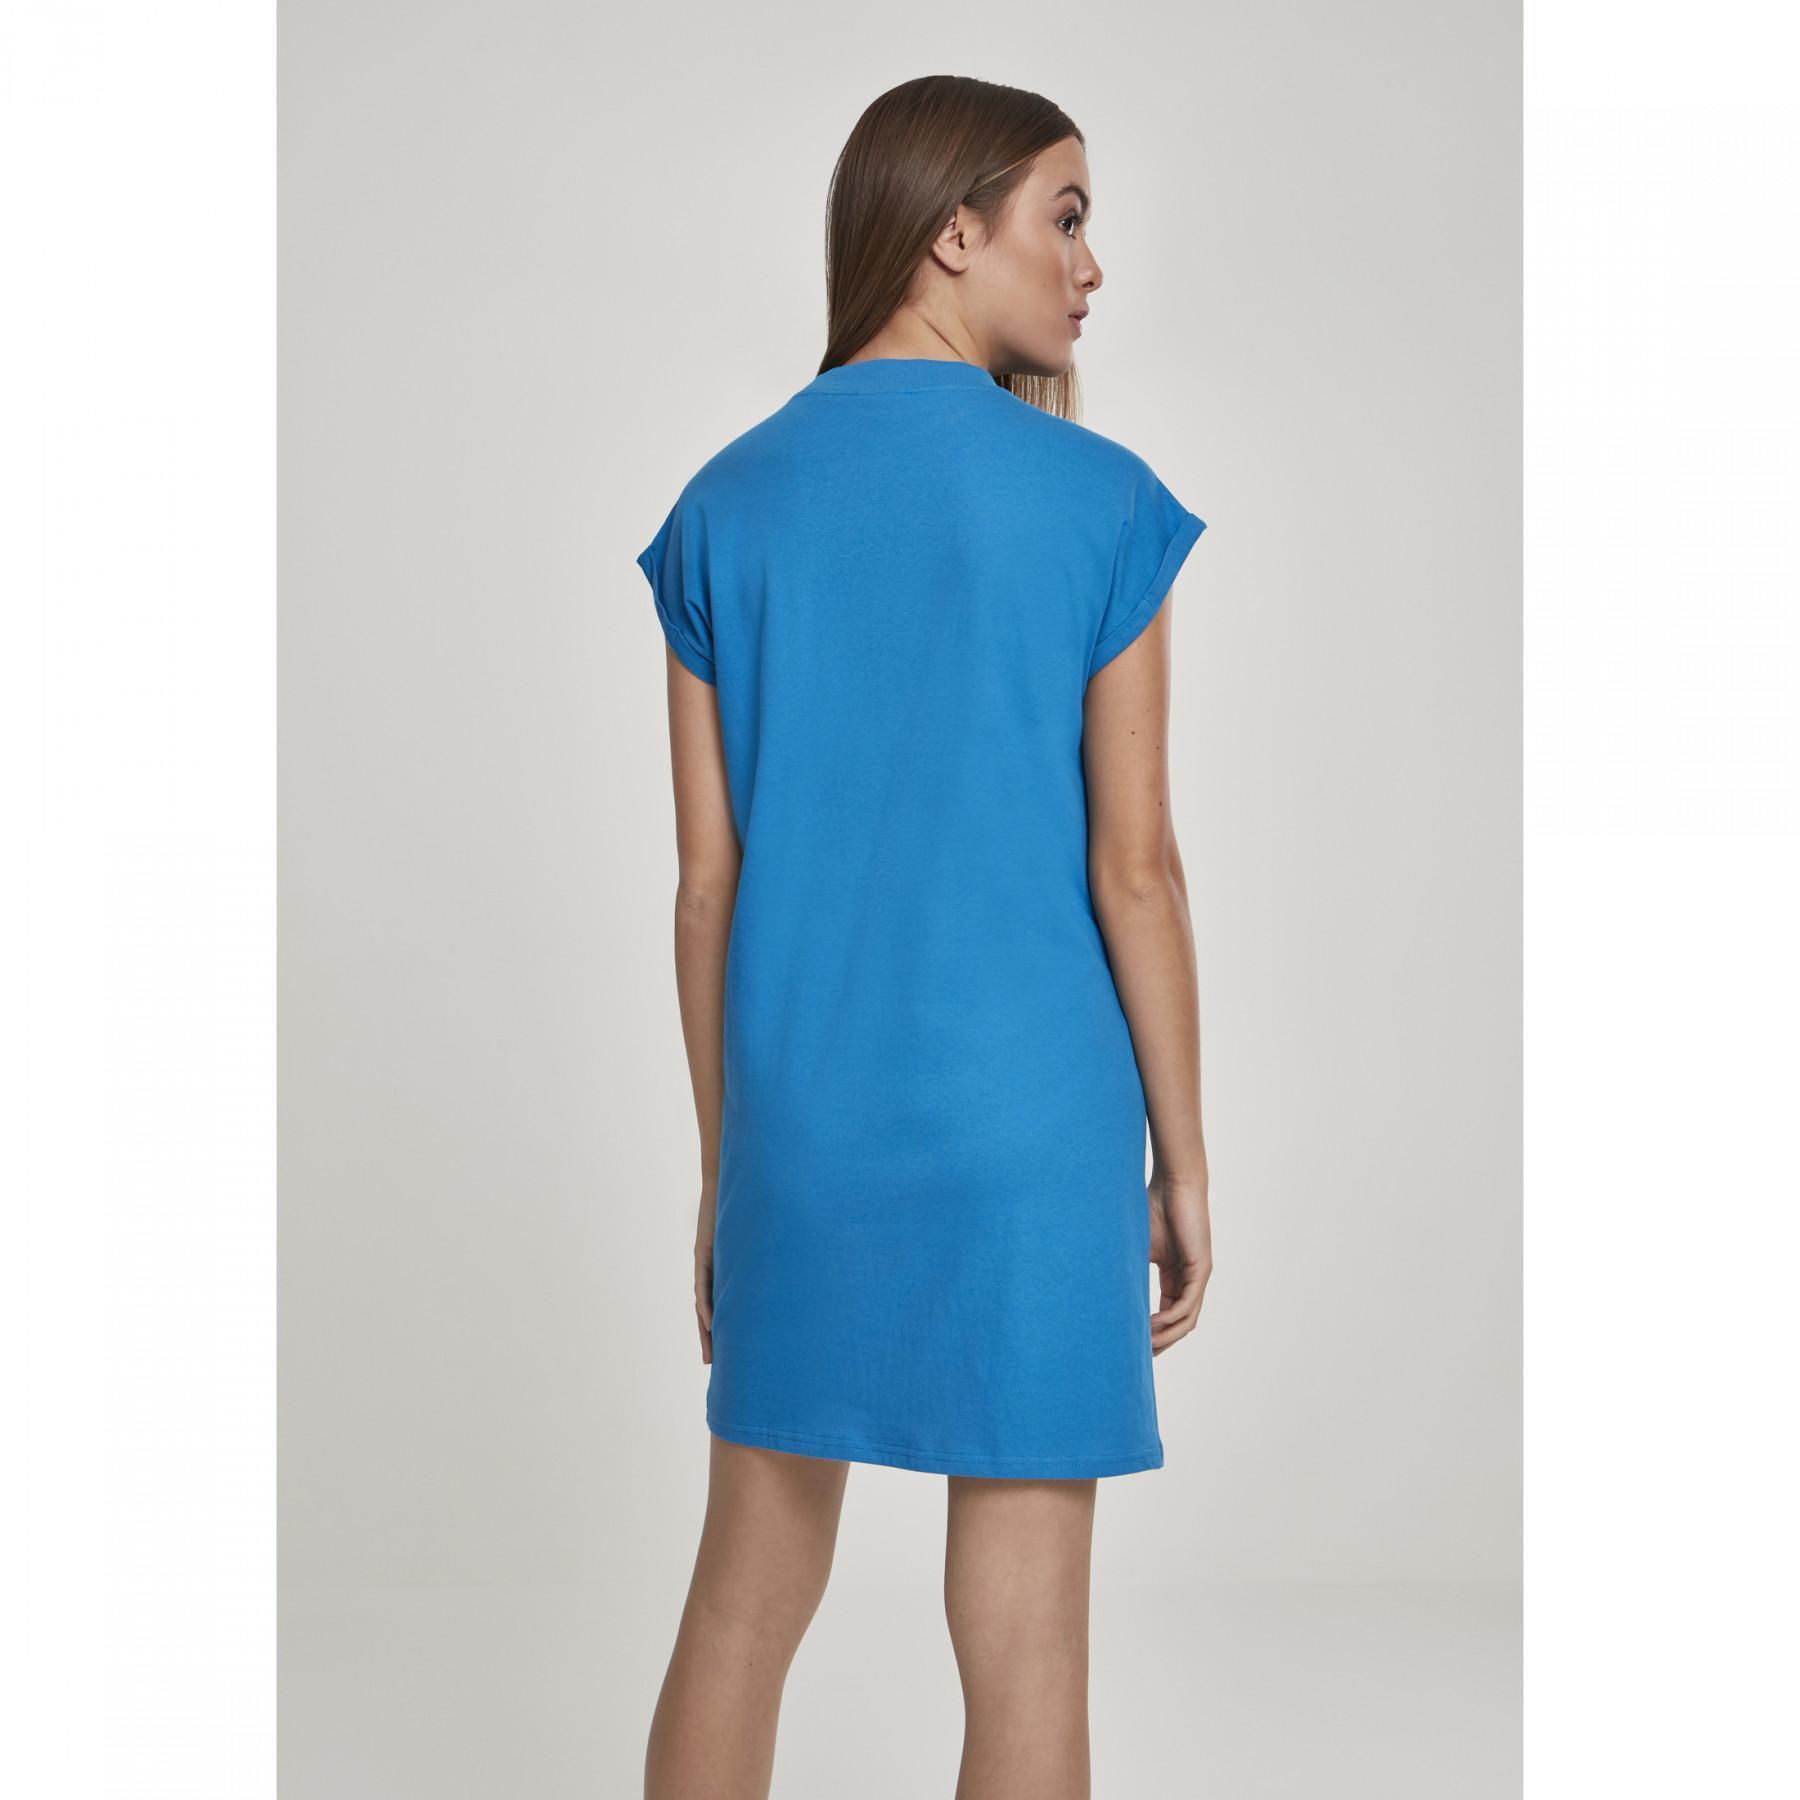 Women's Urban Classic turtle extended dress